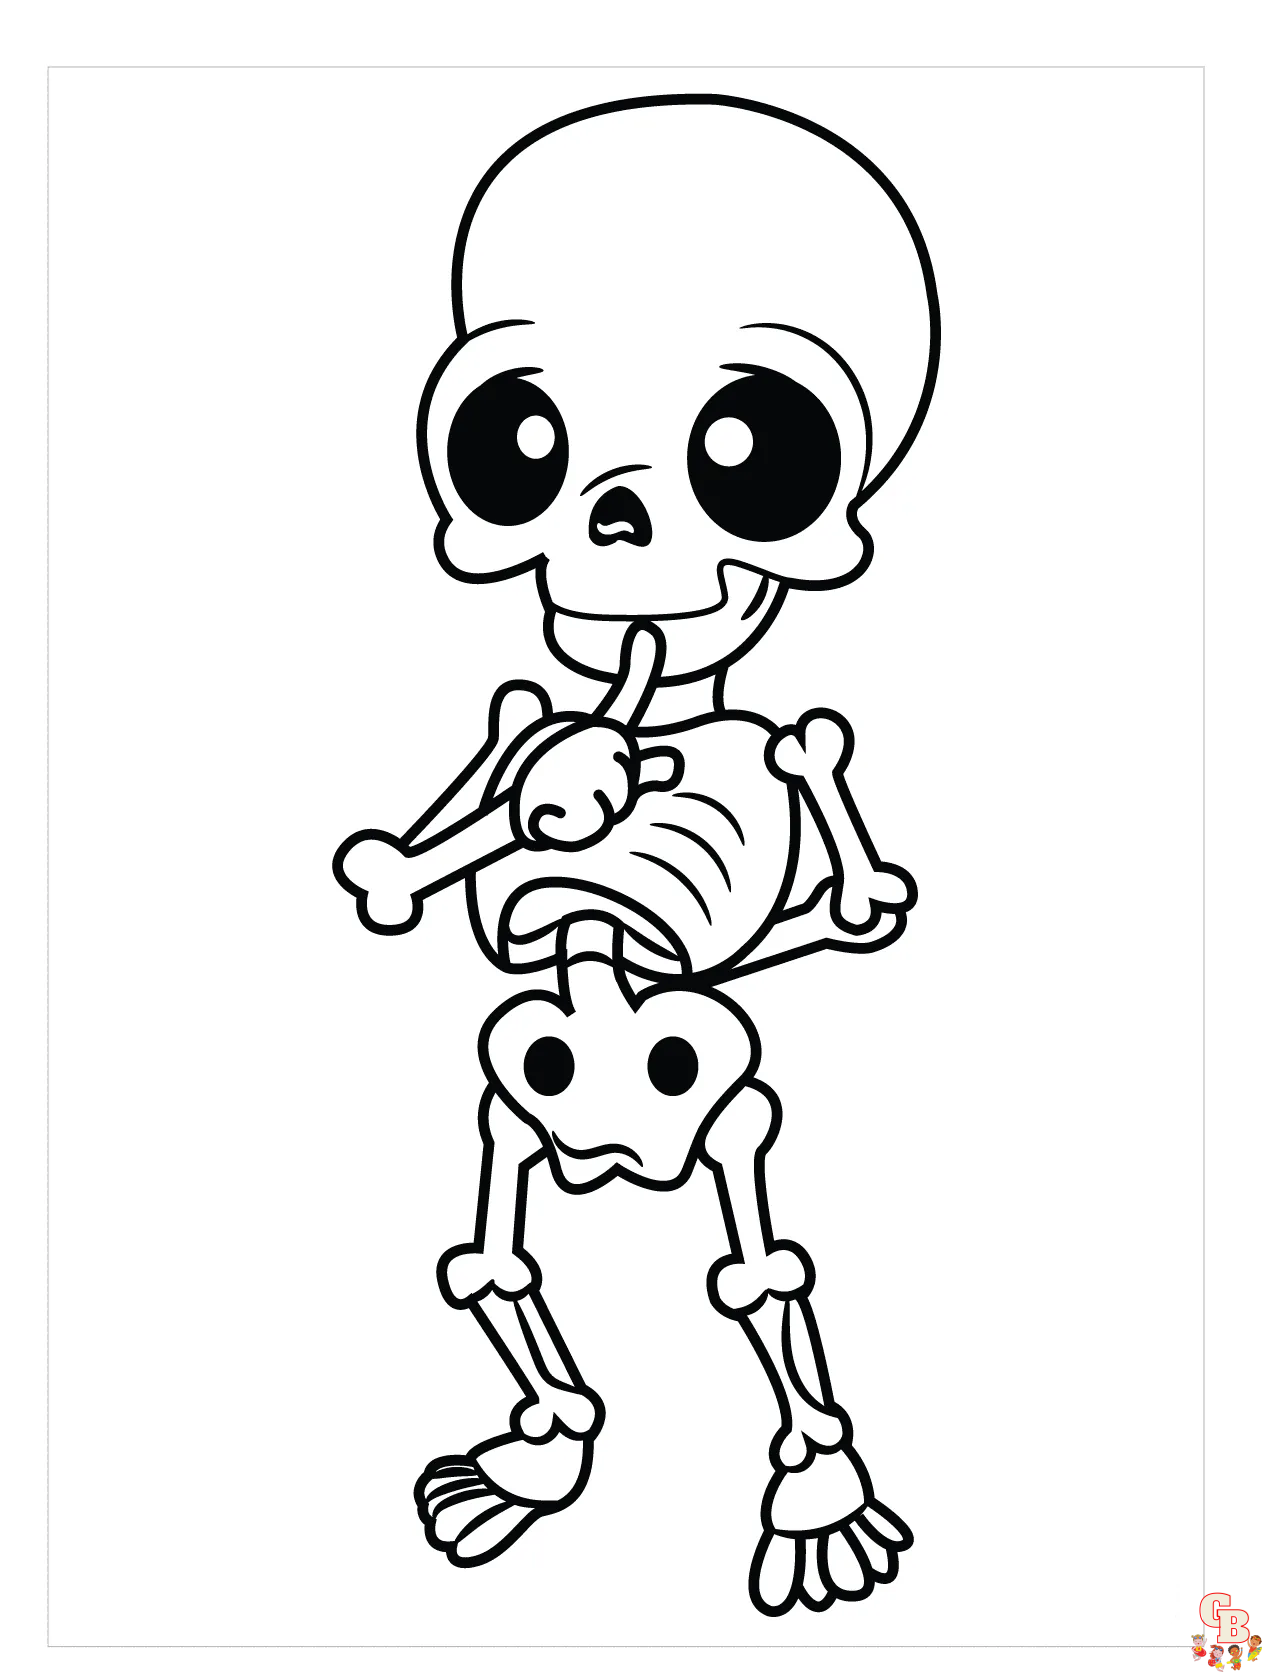 Skeleton coloring pages free printable sheets for kids